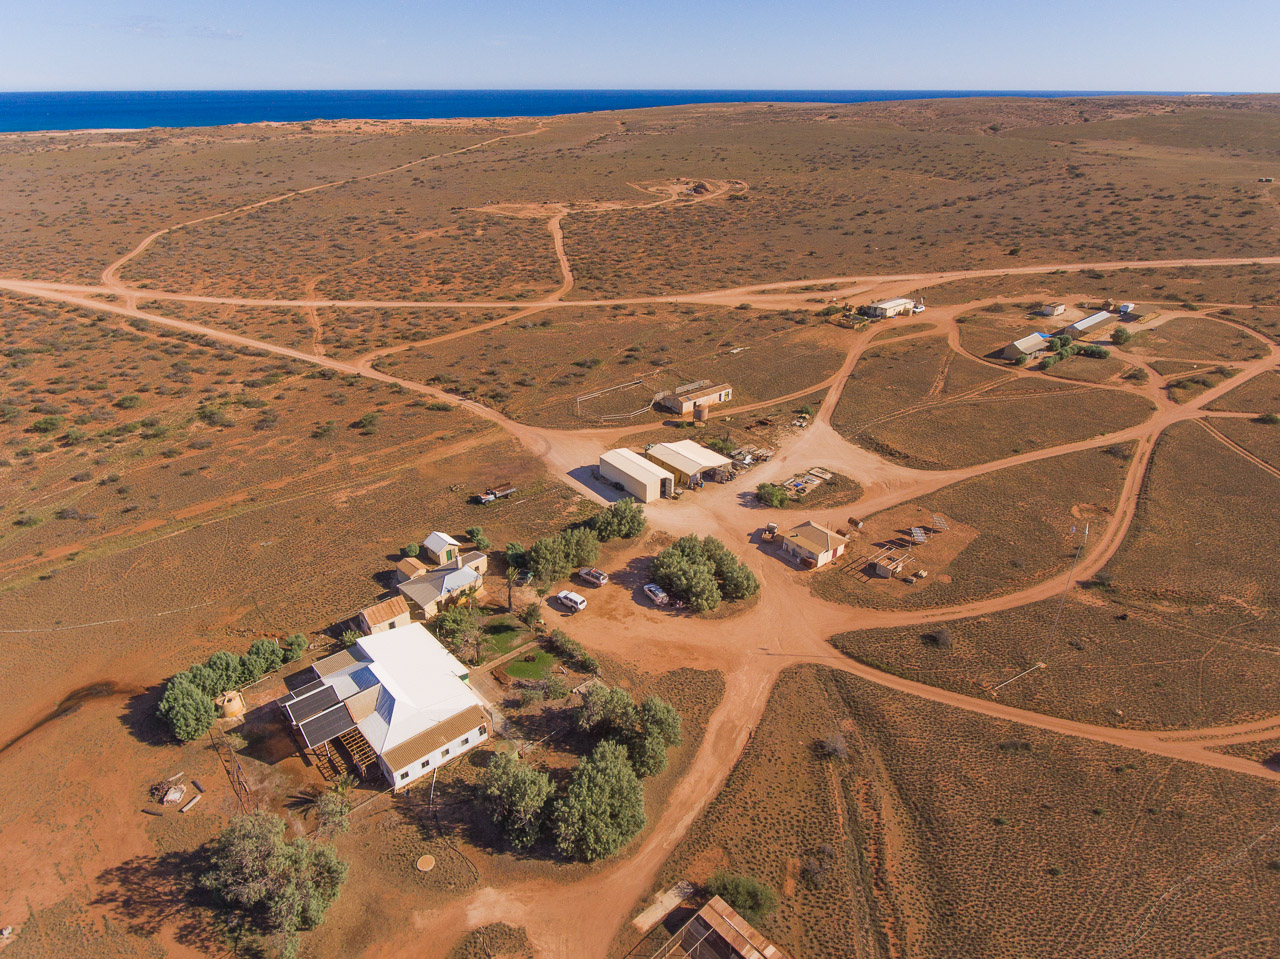 Aerial photo of the homestead and station buildings, looking towards the west coast at Warroora Station in Western Australia